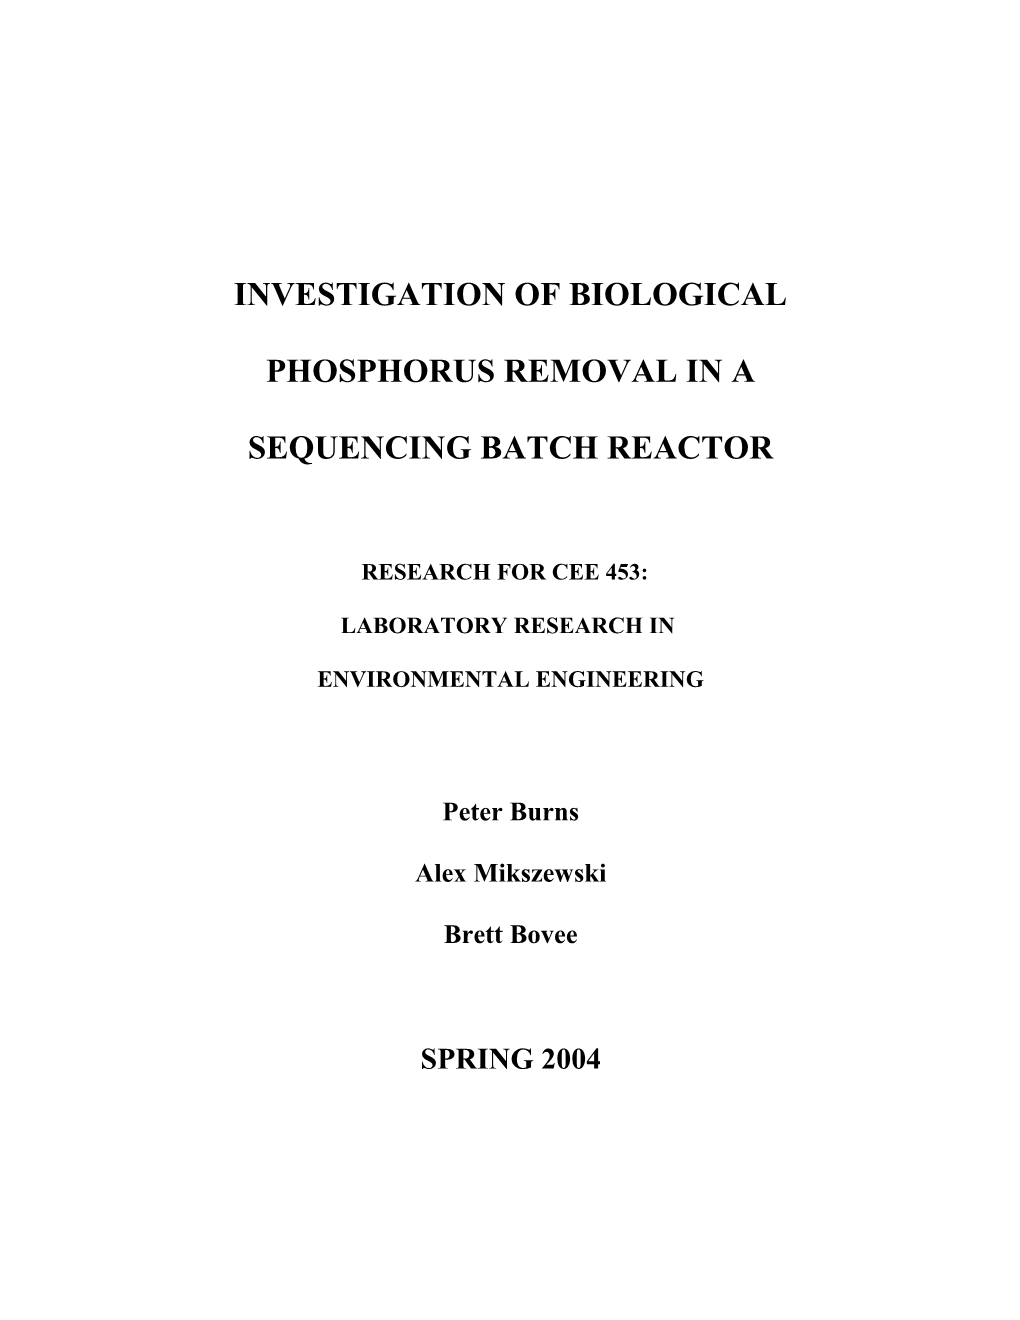 Investigation of Biological Phosphorus Removal in a Sequencing Batch Reactor